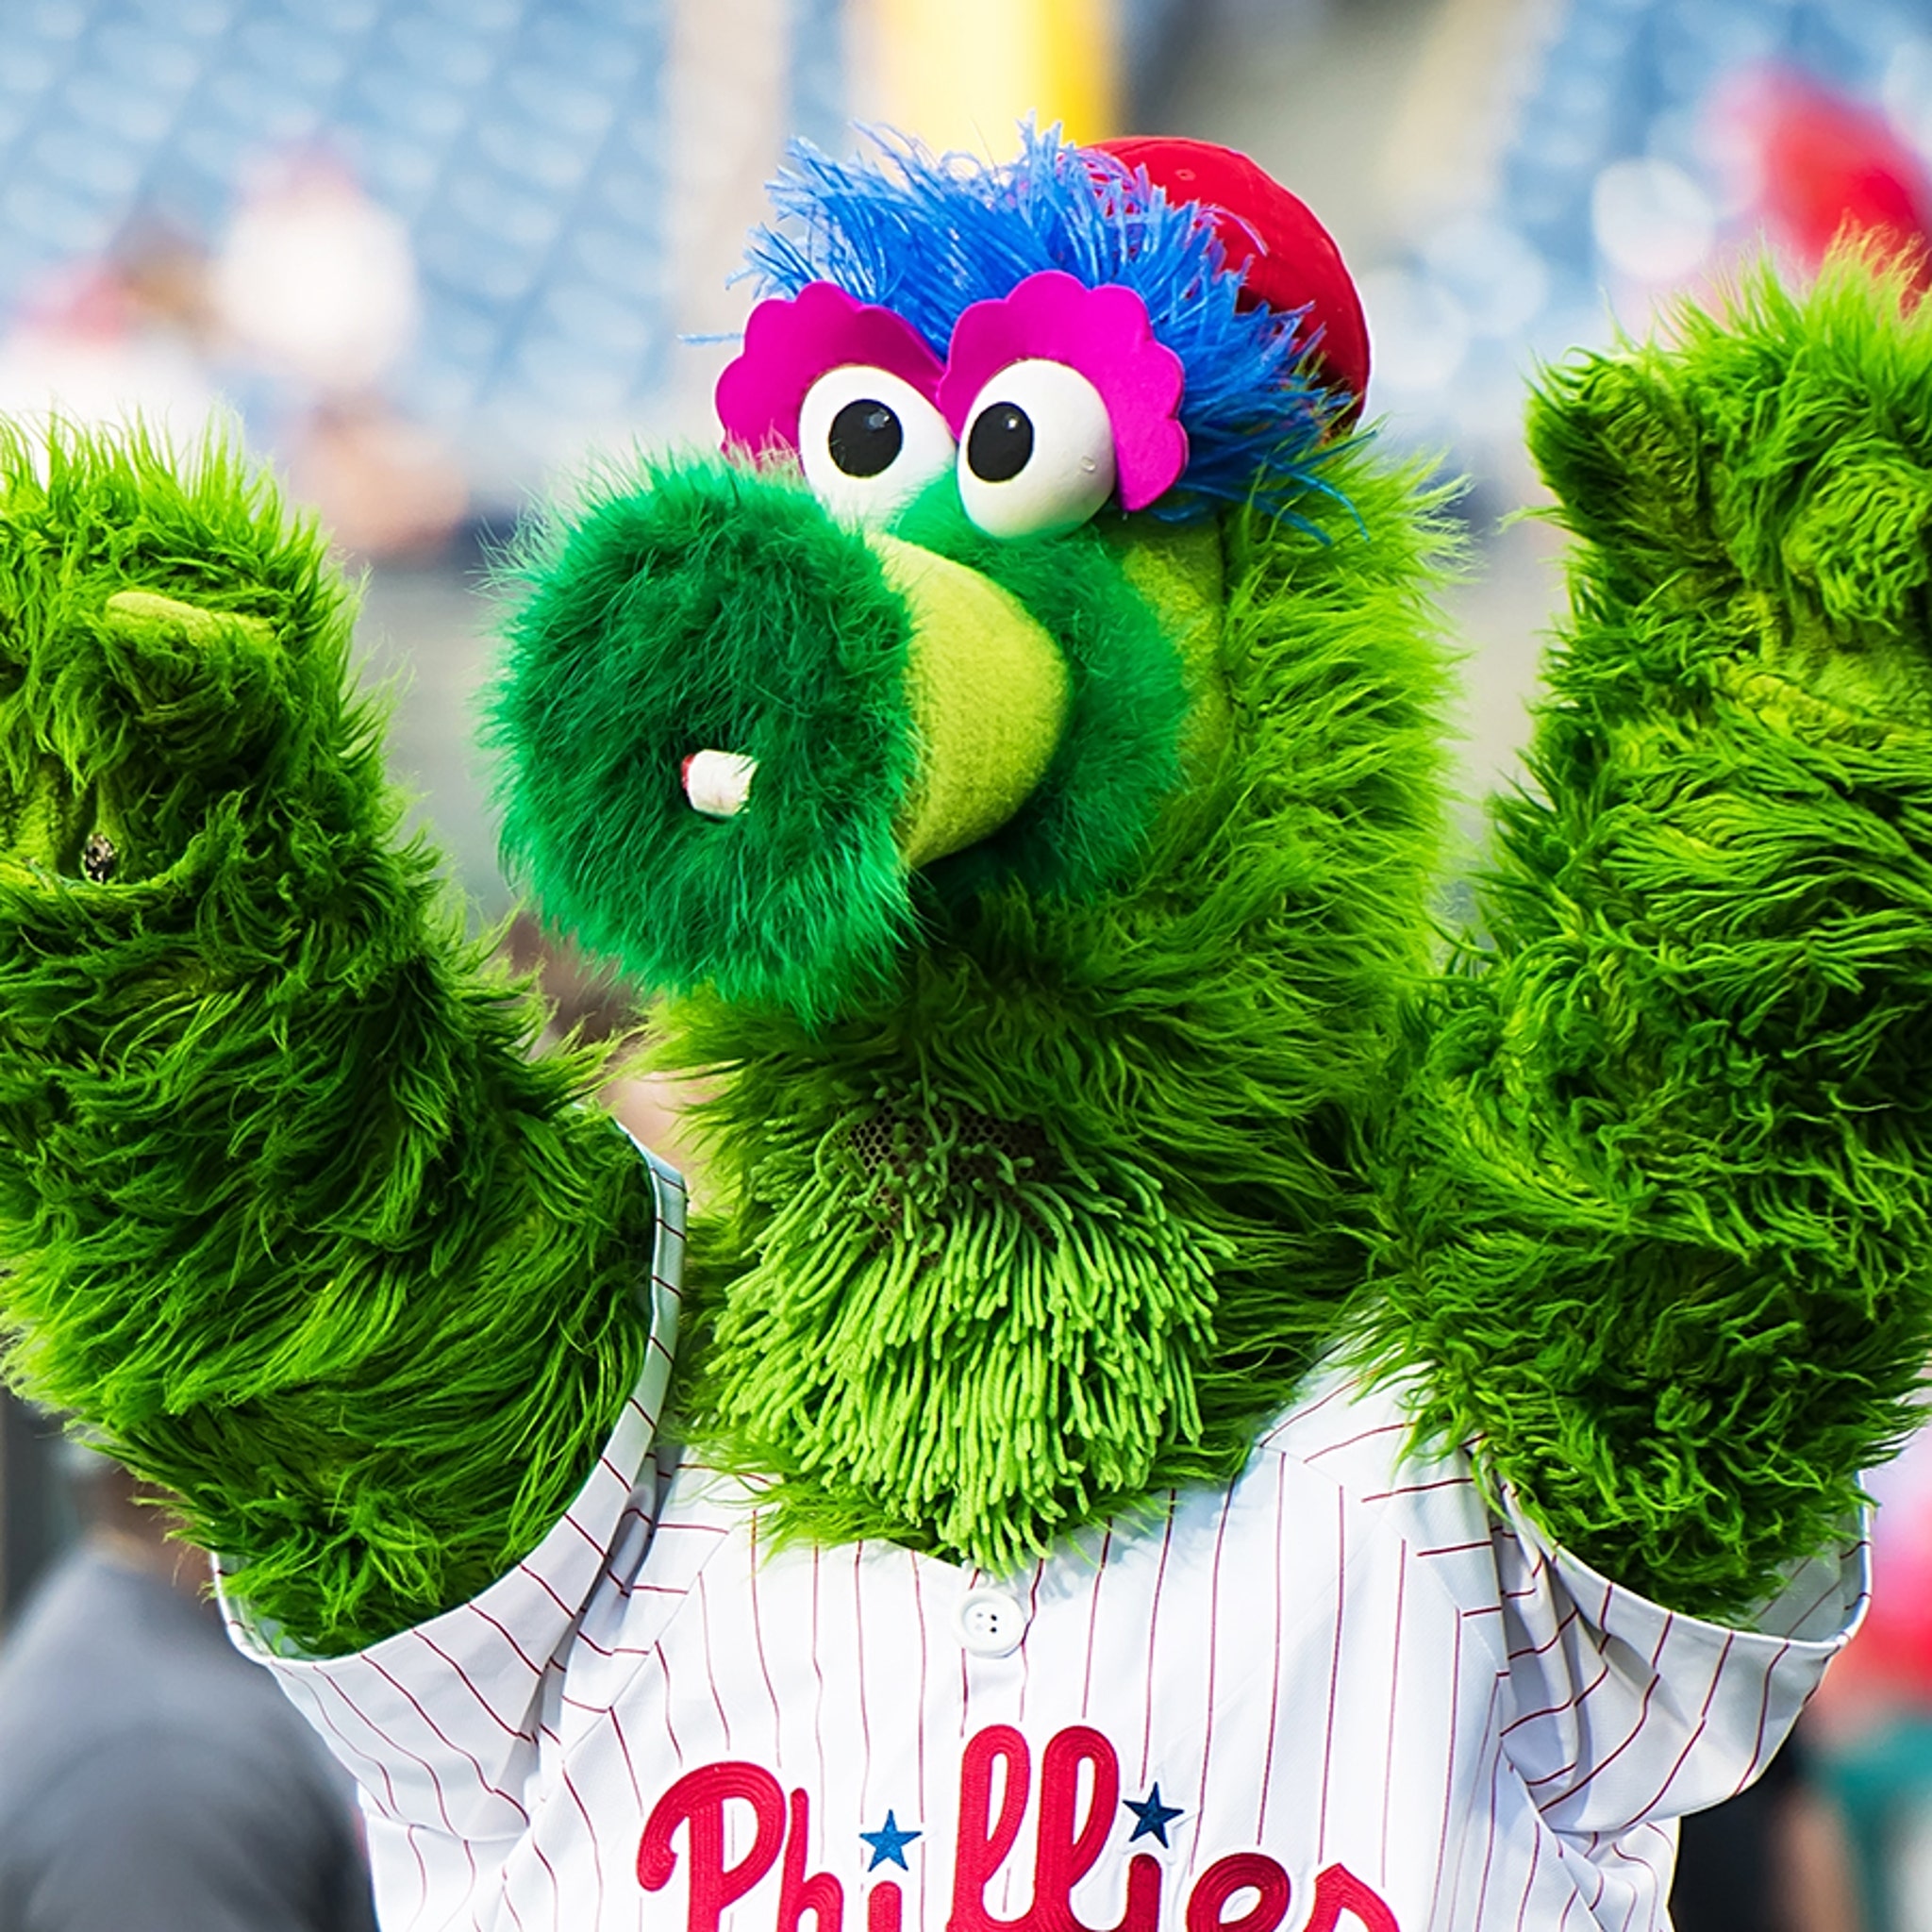 Phillies Phanatic Mascot's New Look Doesn't Seem Very New At All